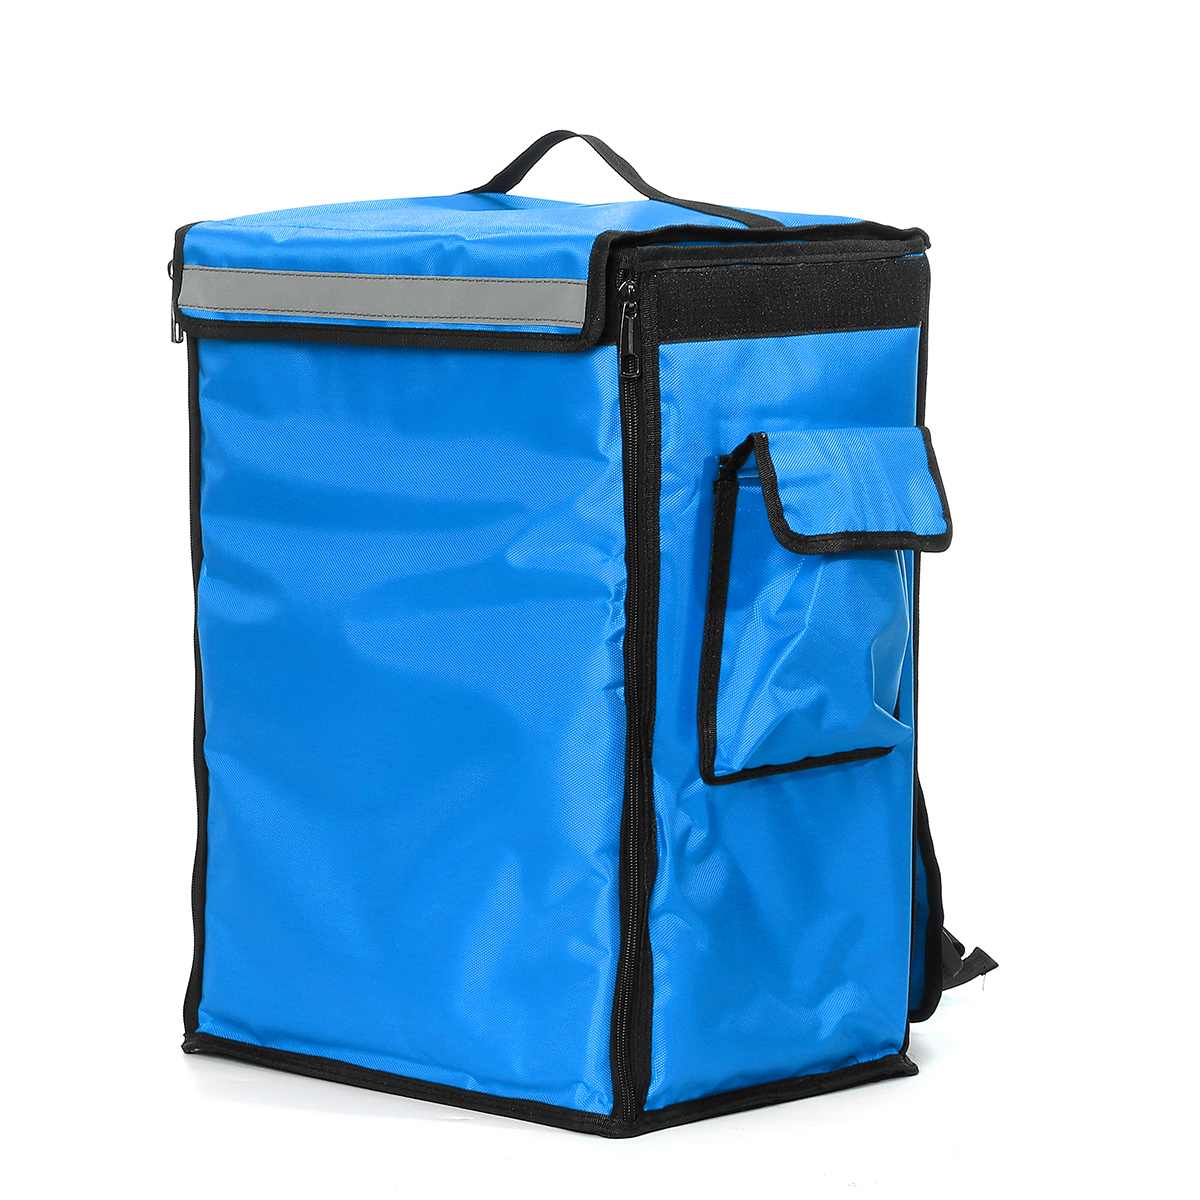 Sac isotherme. Sac deliveroo. Sac isotherme livraison - Conservatis